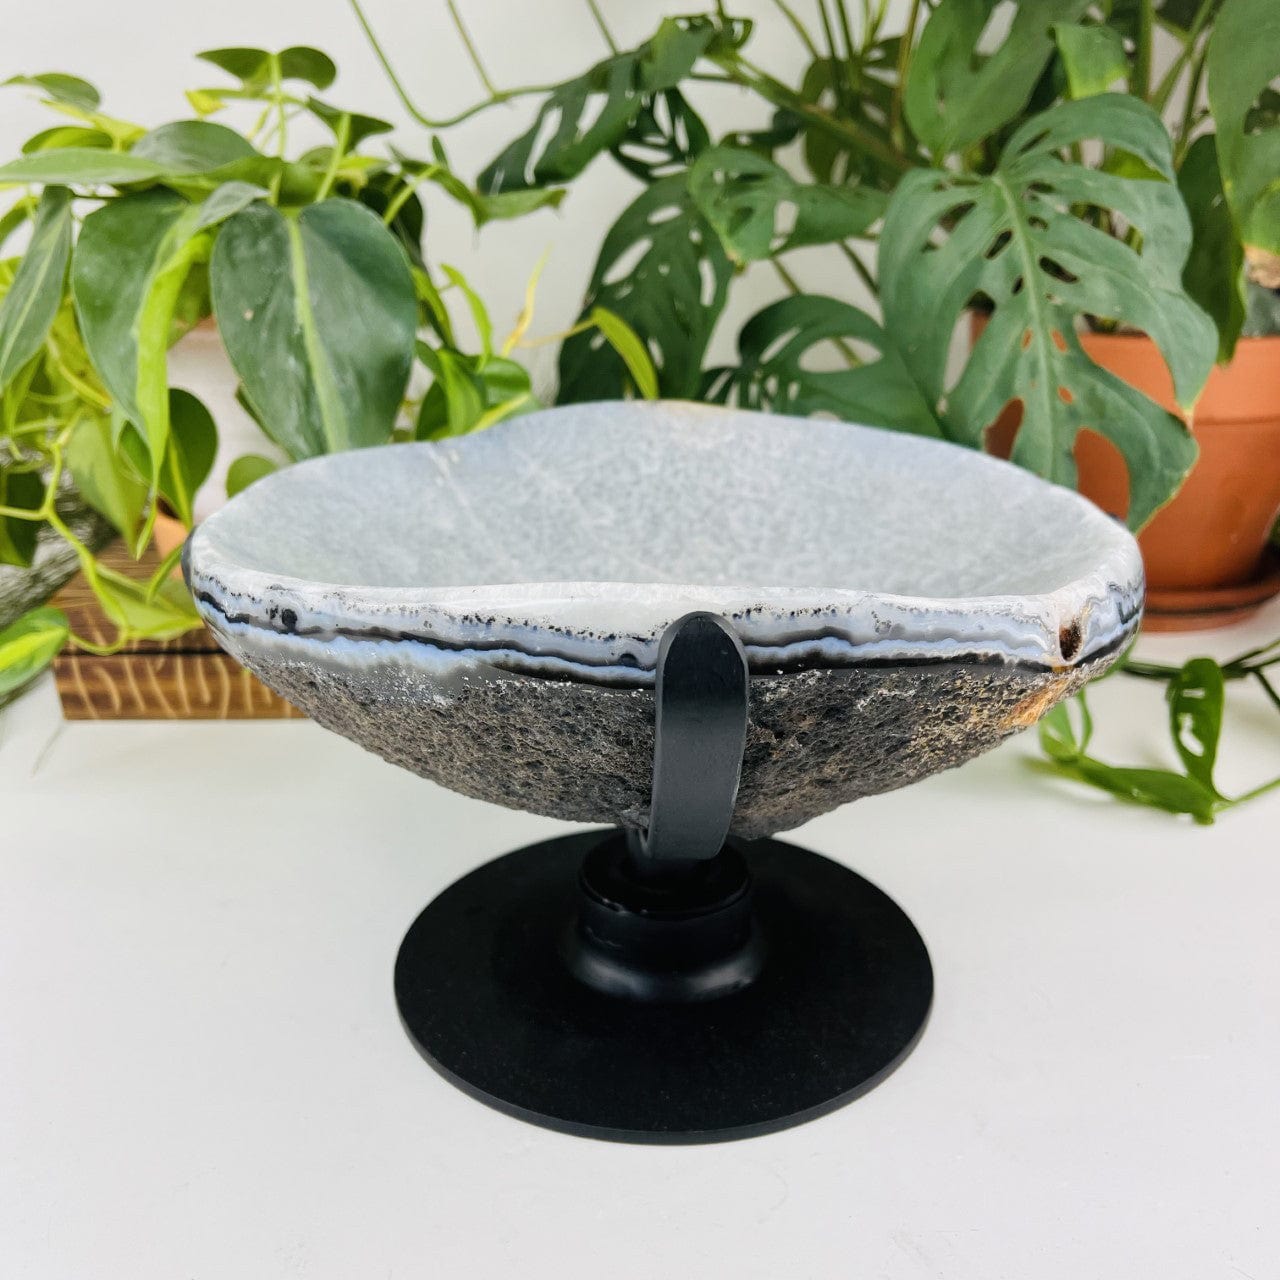 Polished Agate Dish on Metal Spinning Base on display showing side view